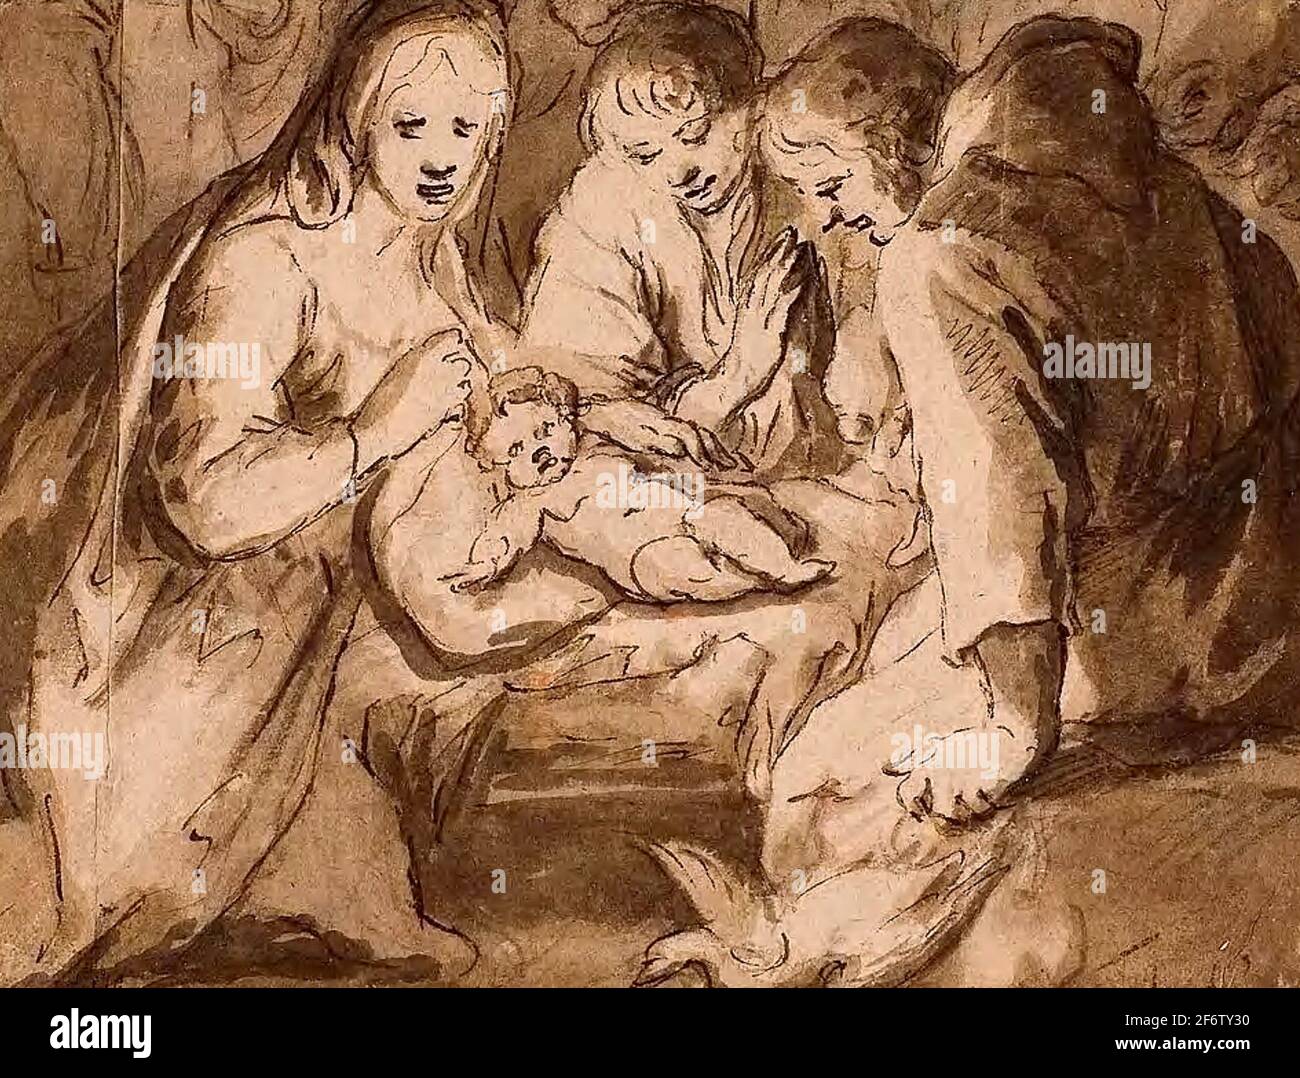 Author: Jan Harmensz. Muller. Adoration of the Shepherds - Jan Harmensz Muller Dutch, 1571-1628. Pen and brown ink, with brush and brown wash, over Stock Photo